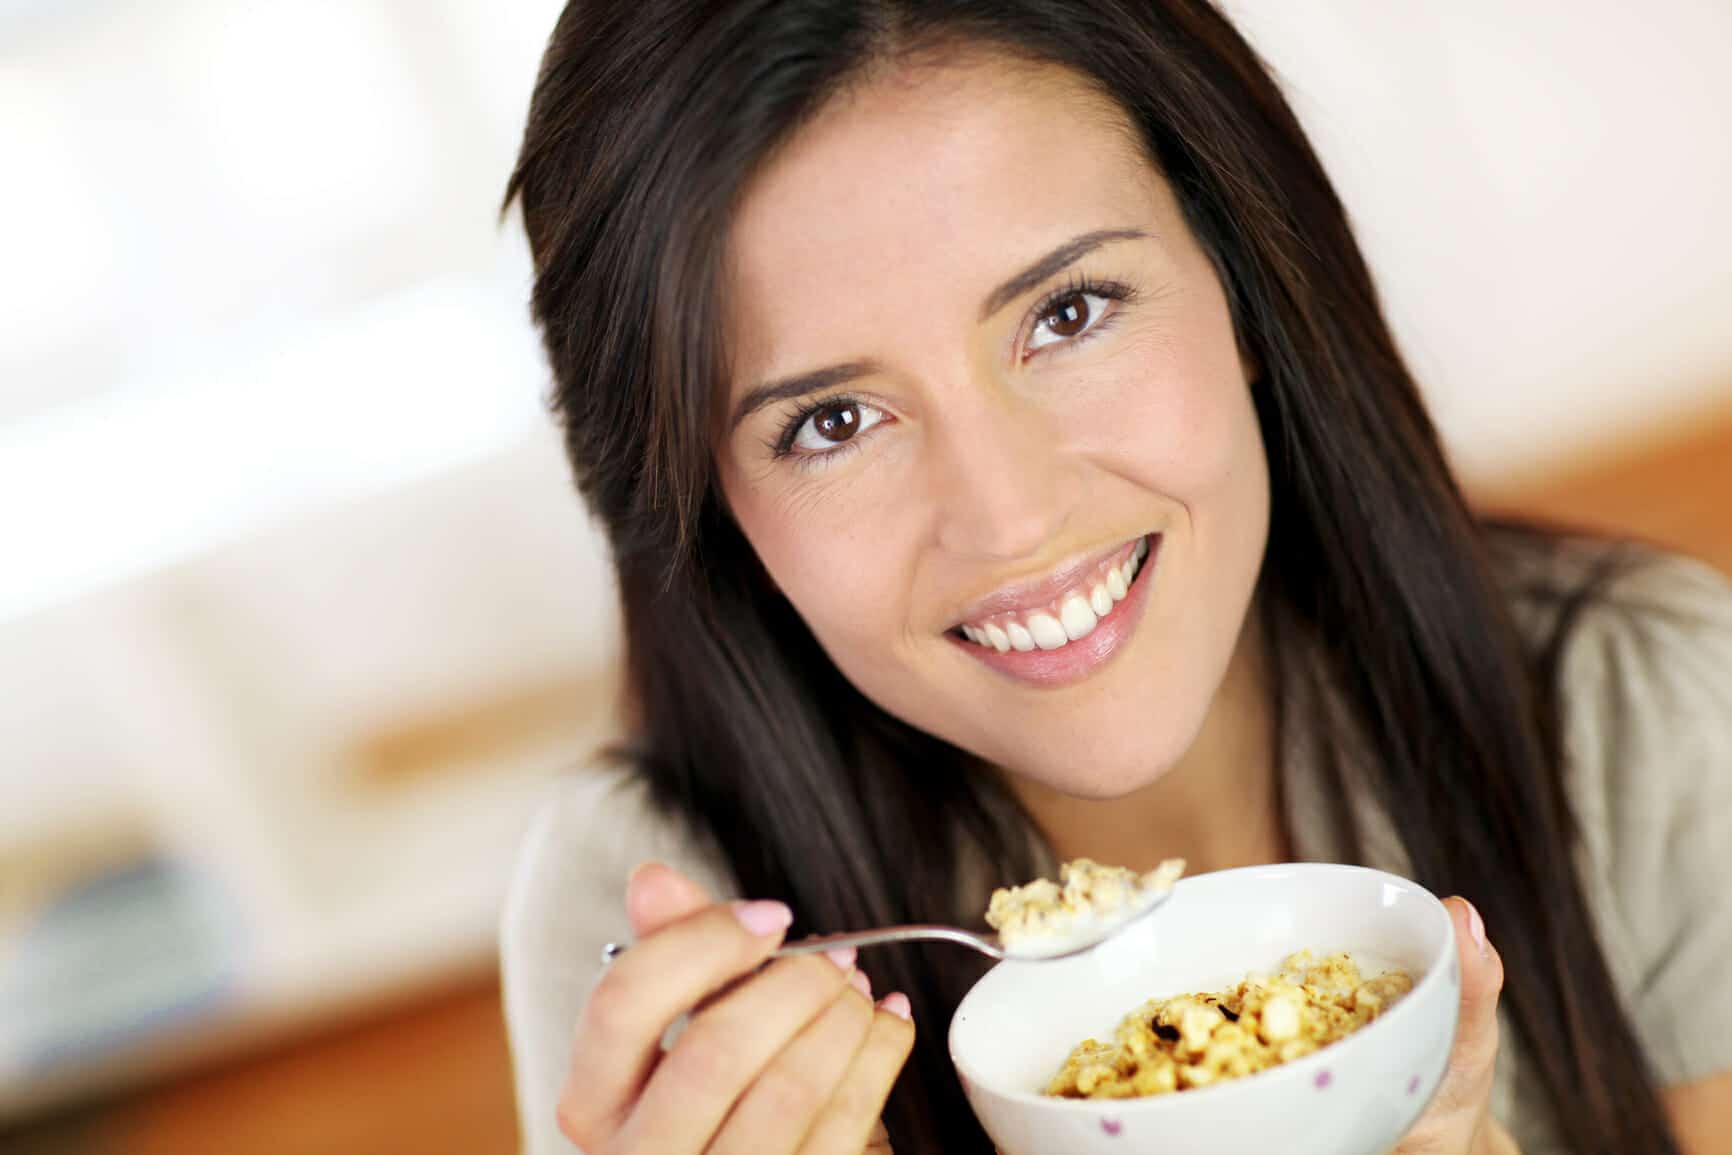 Woman eating cereal